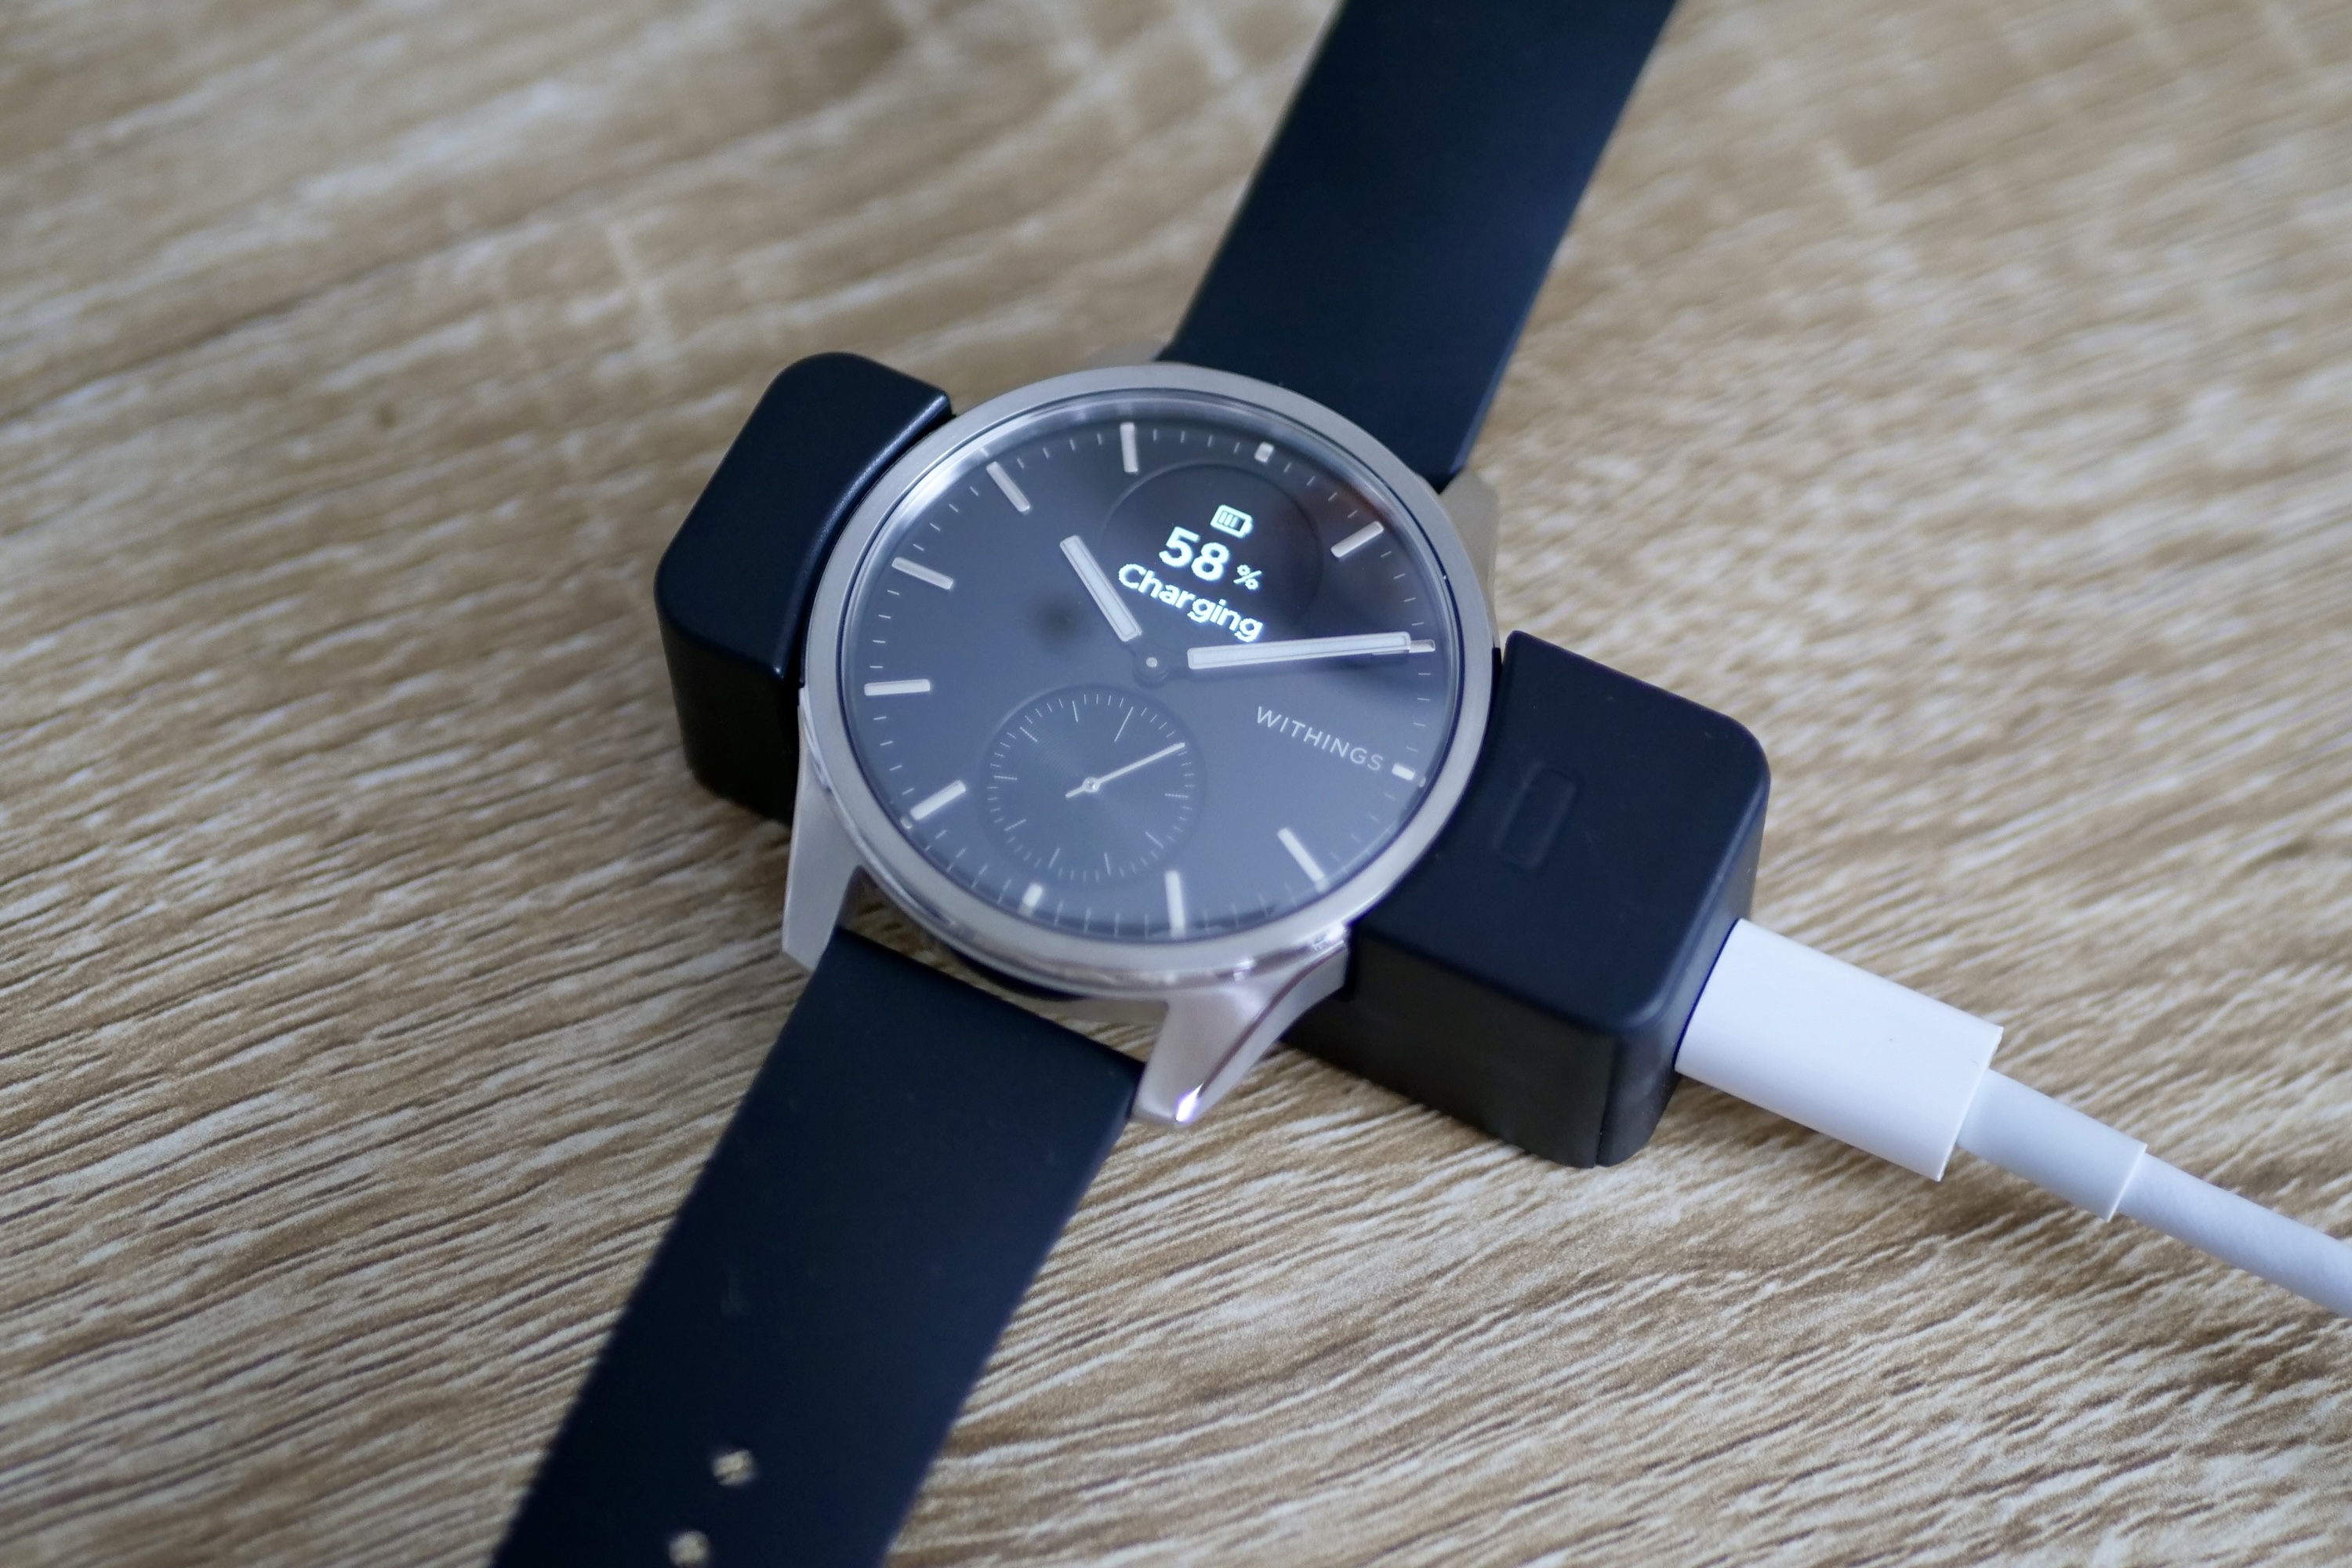 Hands On With the Withings ScanWatch 2, ScanWatch Light Smartwatches